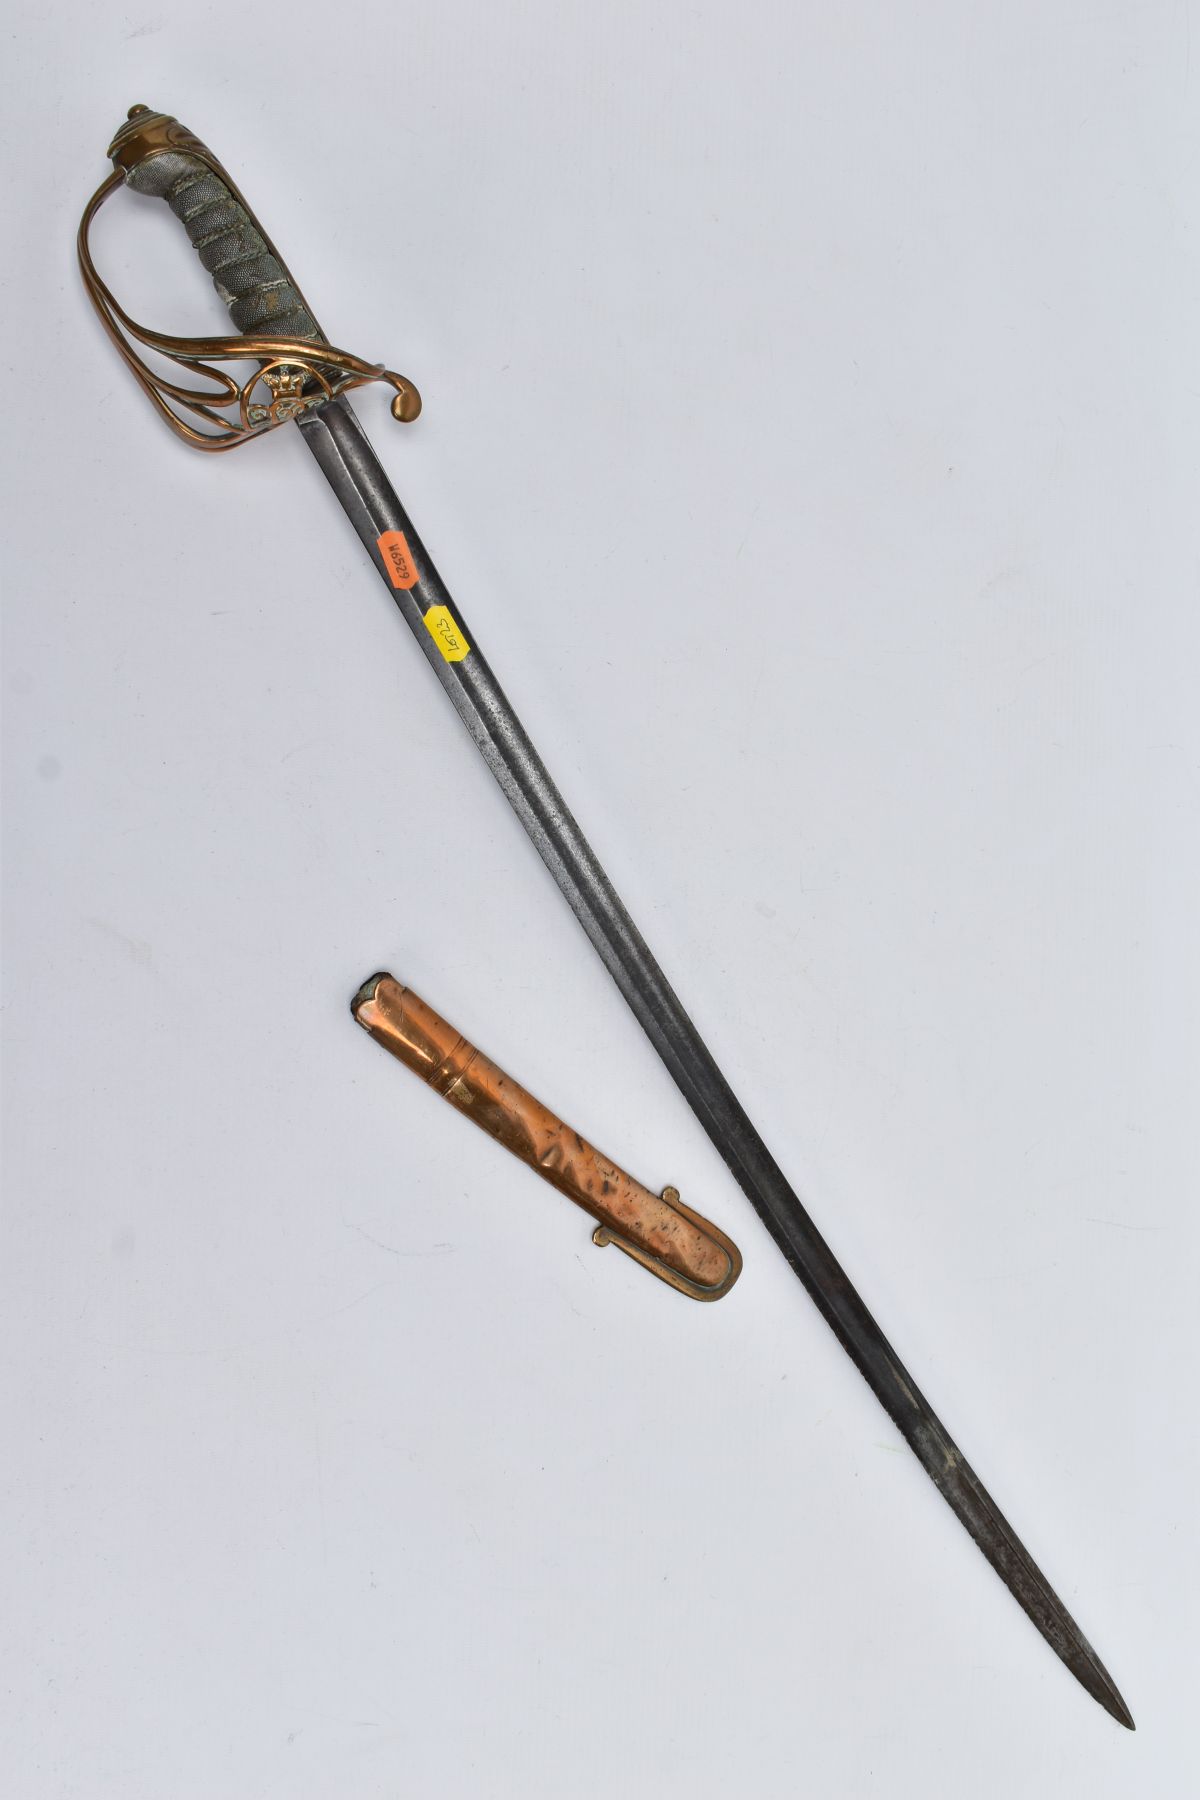 A BRITISH VICTORIAN ERA INFANTRY OFFICERS SWORD (possibly 1845 pattern), no scabbard apart from